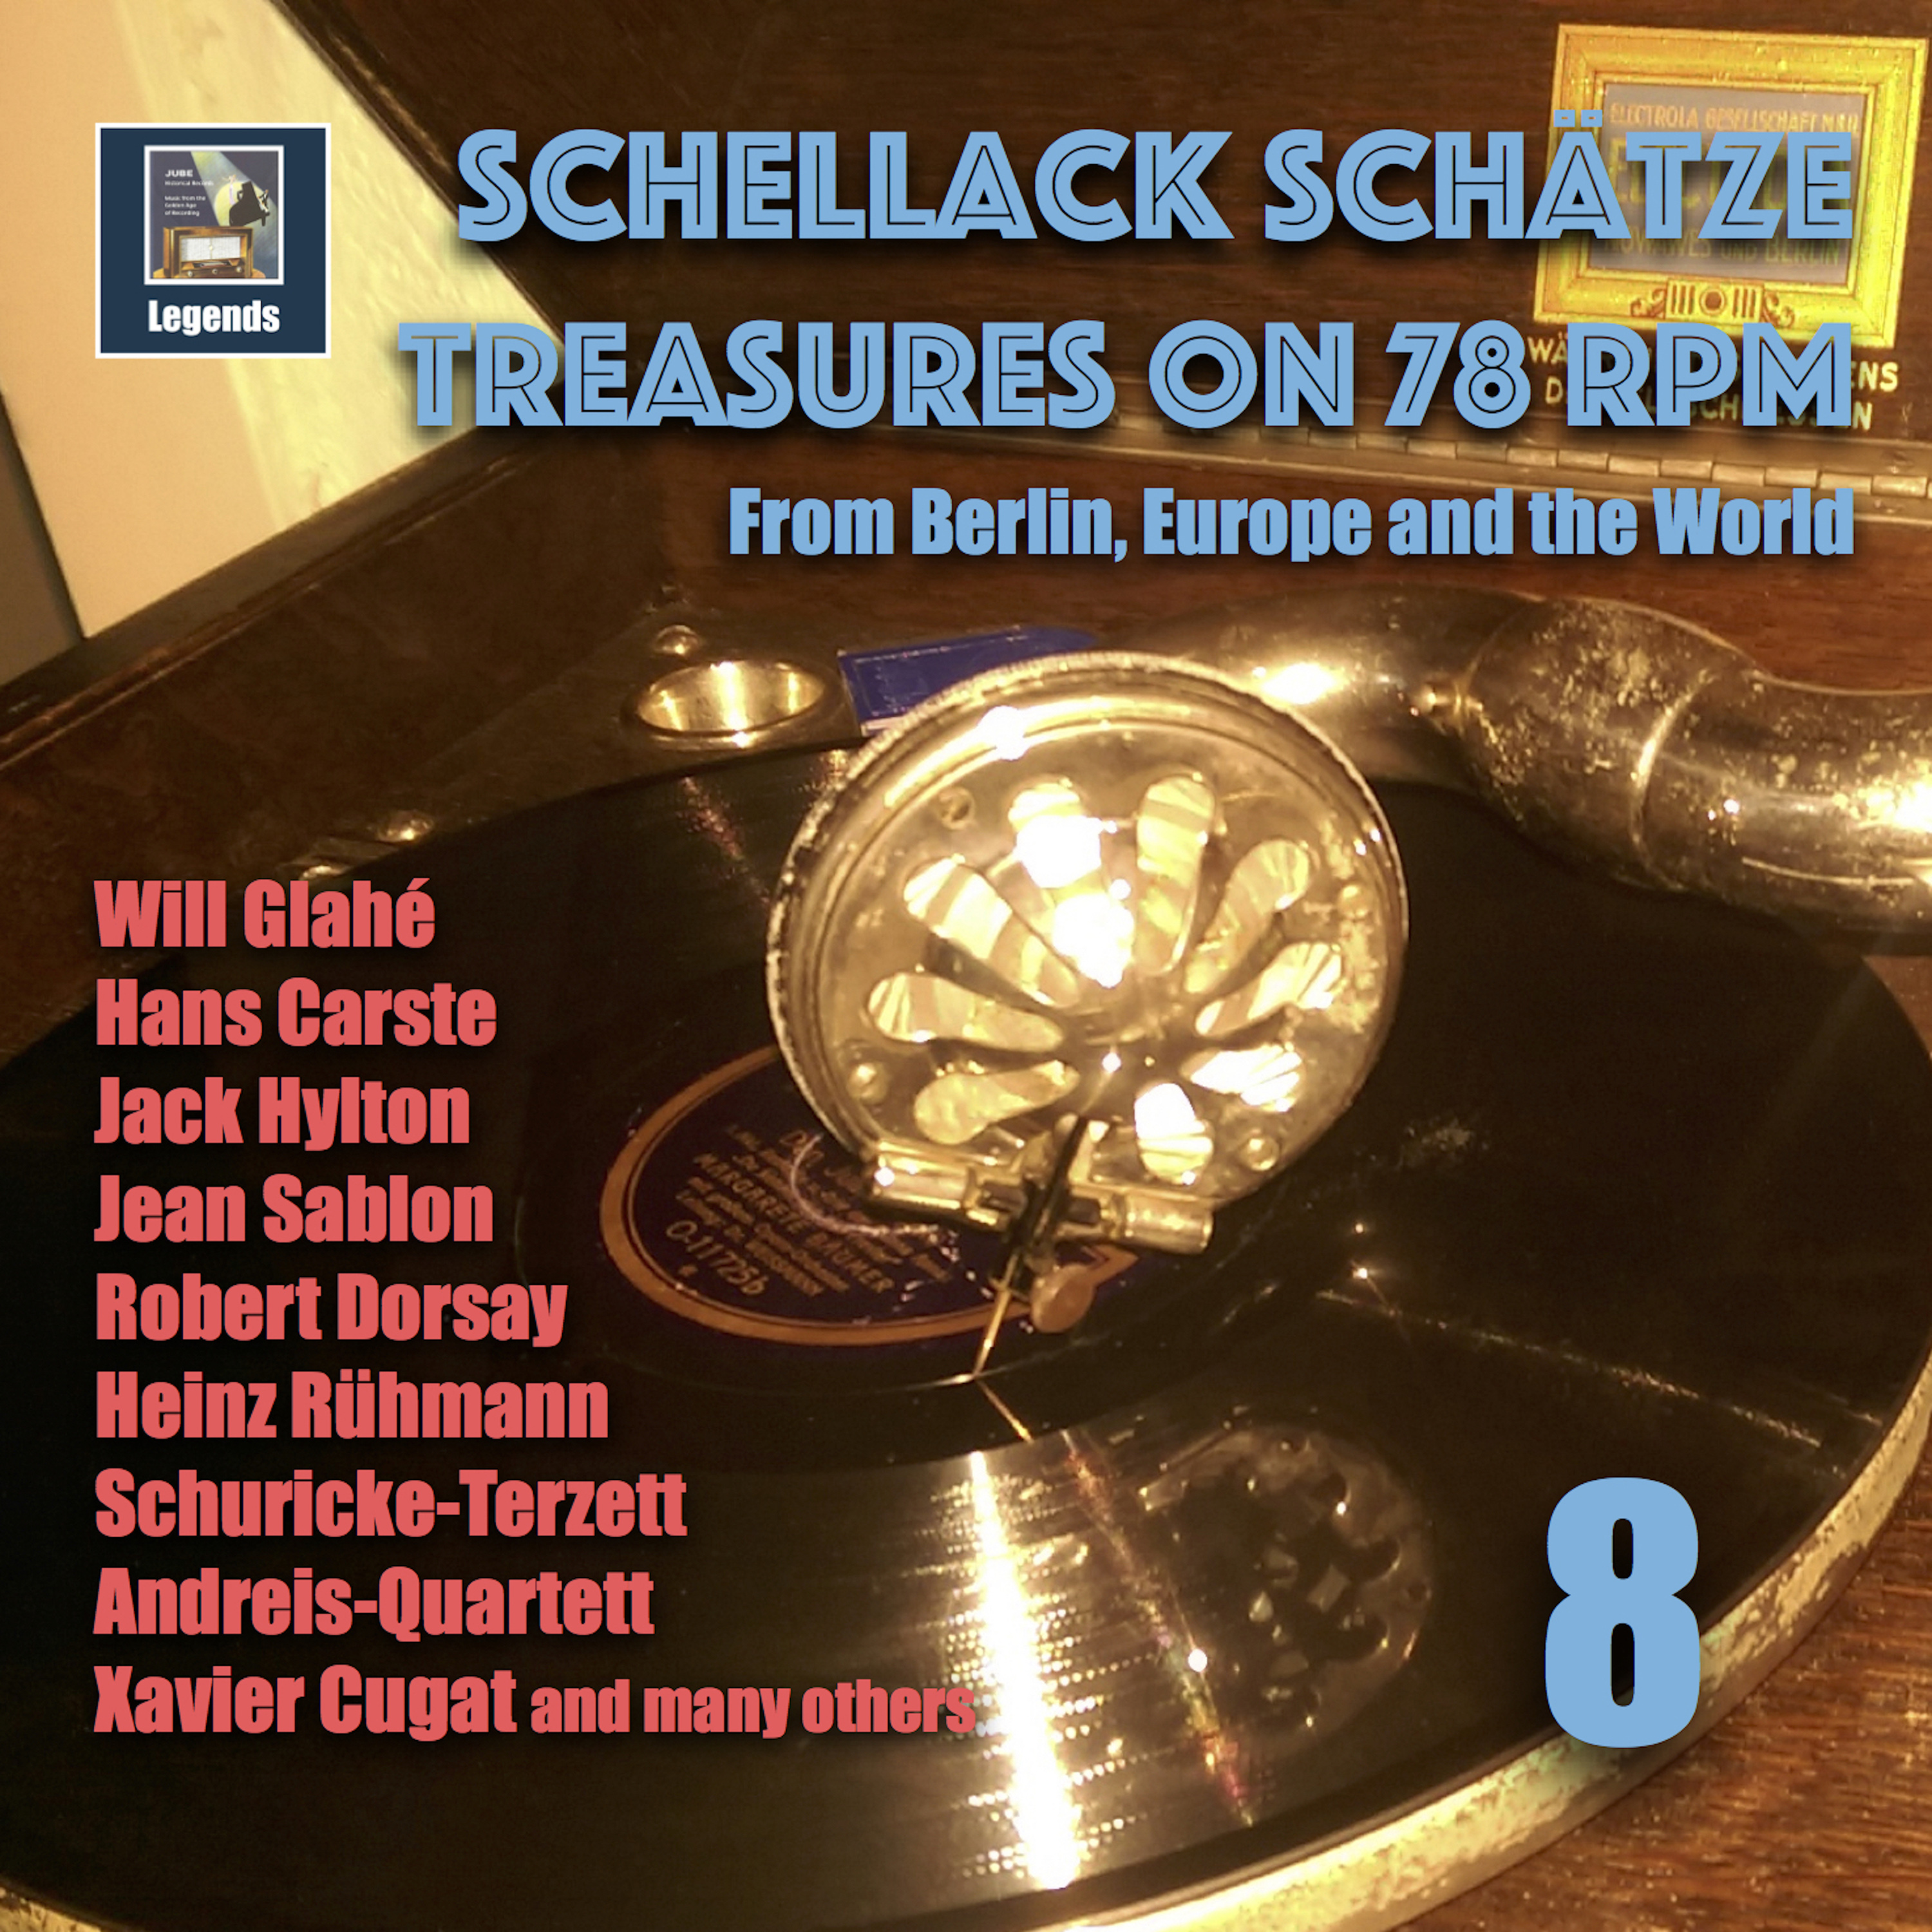 SCHELLACK SCH TZE  Treasures on 78 rpm from Berlin, Europe and the World, Vol. 8